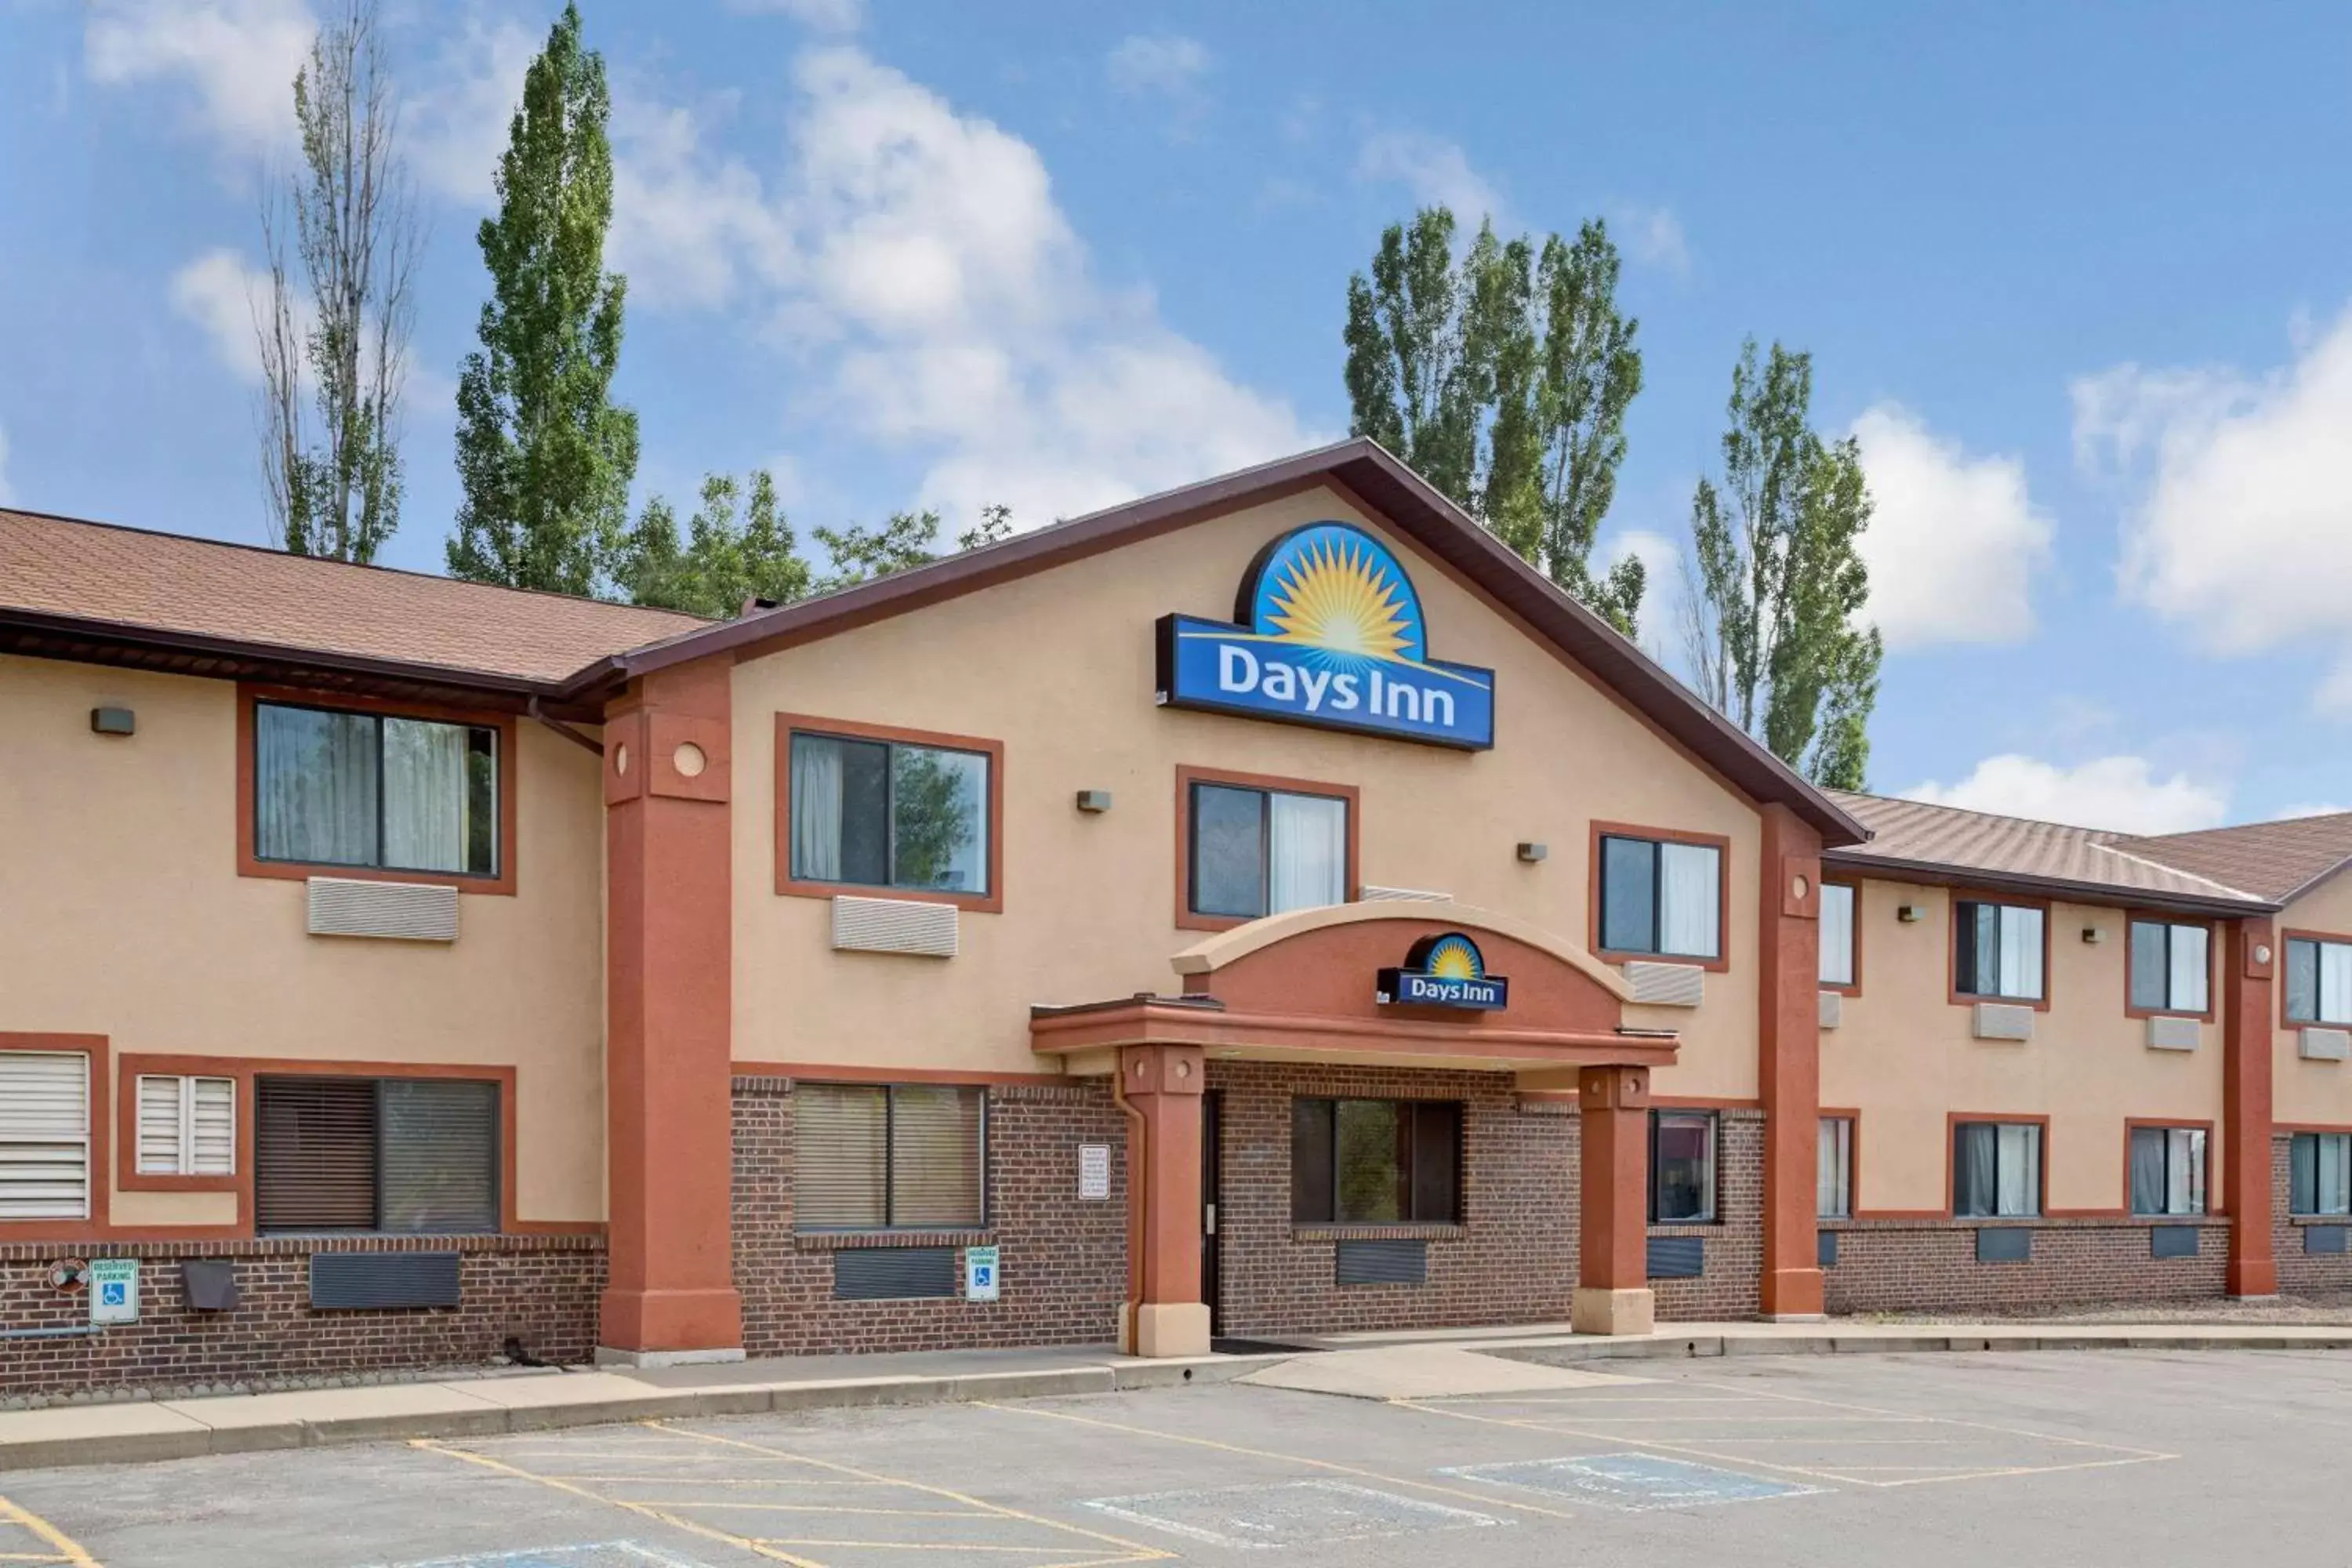 Property building in Days Inn by Wyndham Clearfield